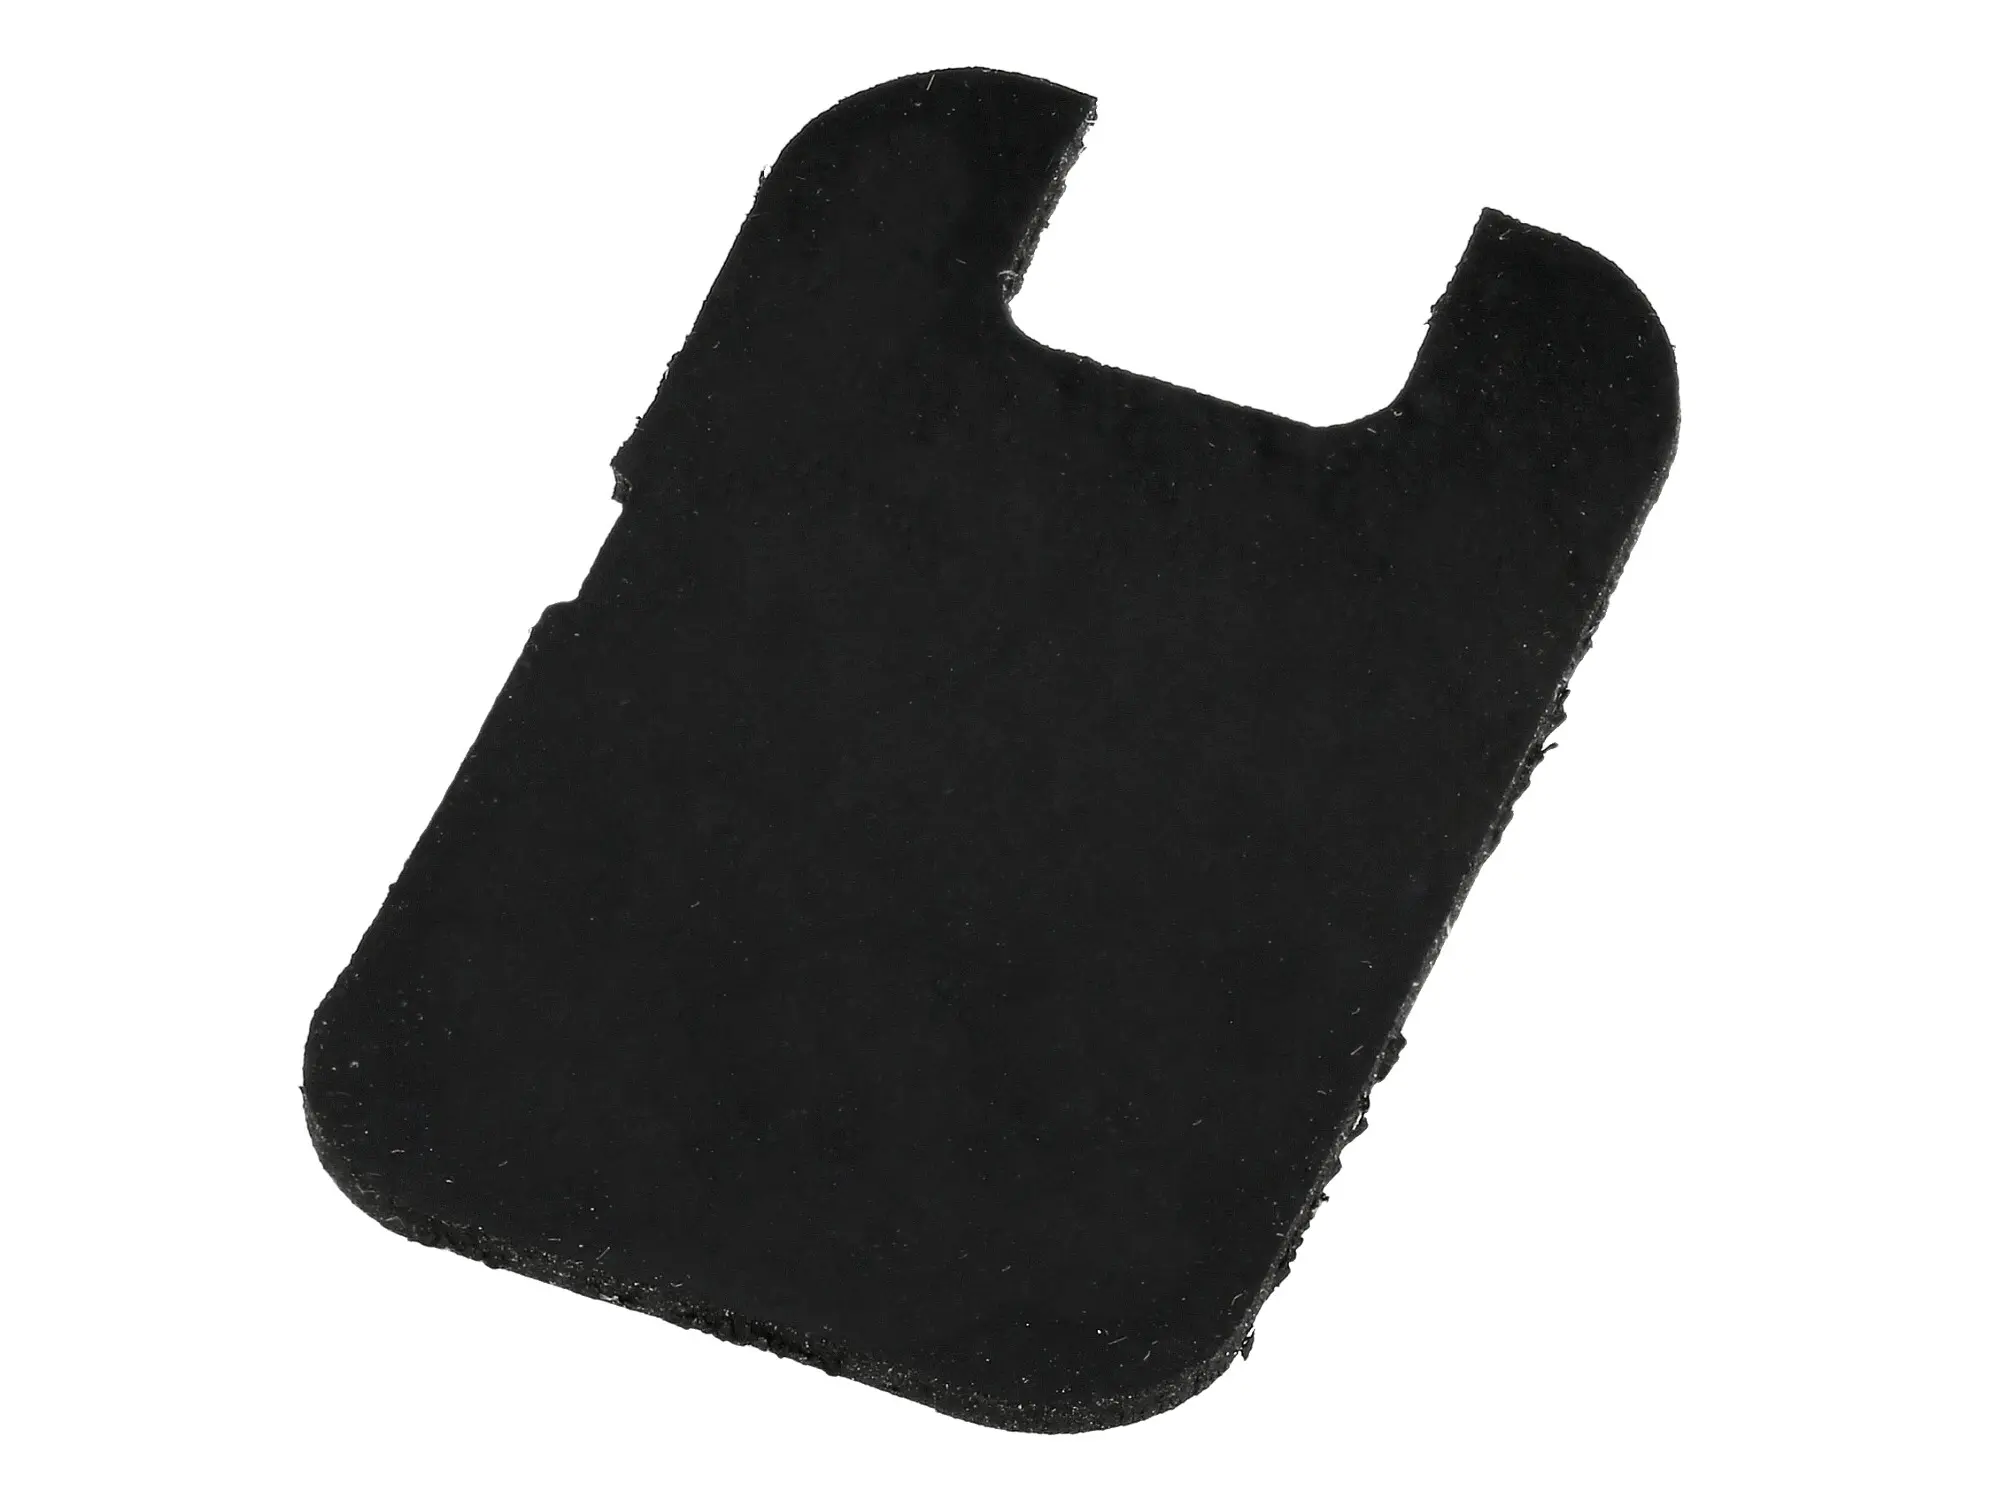 Rubber pad for turn signal or dimmer switch,black, Item no: 10073024 - Image 1